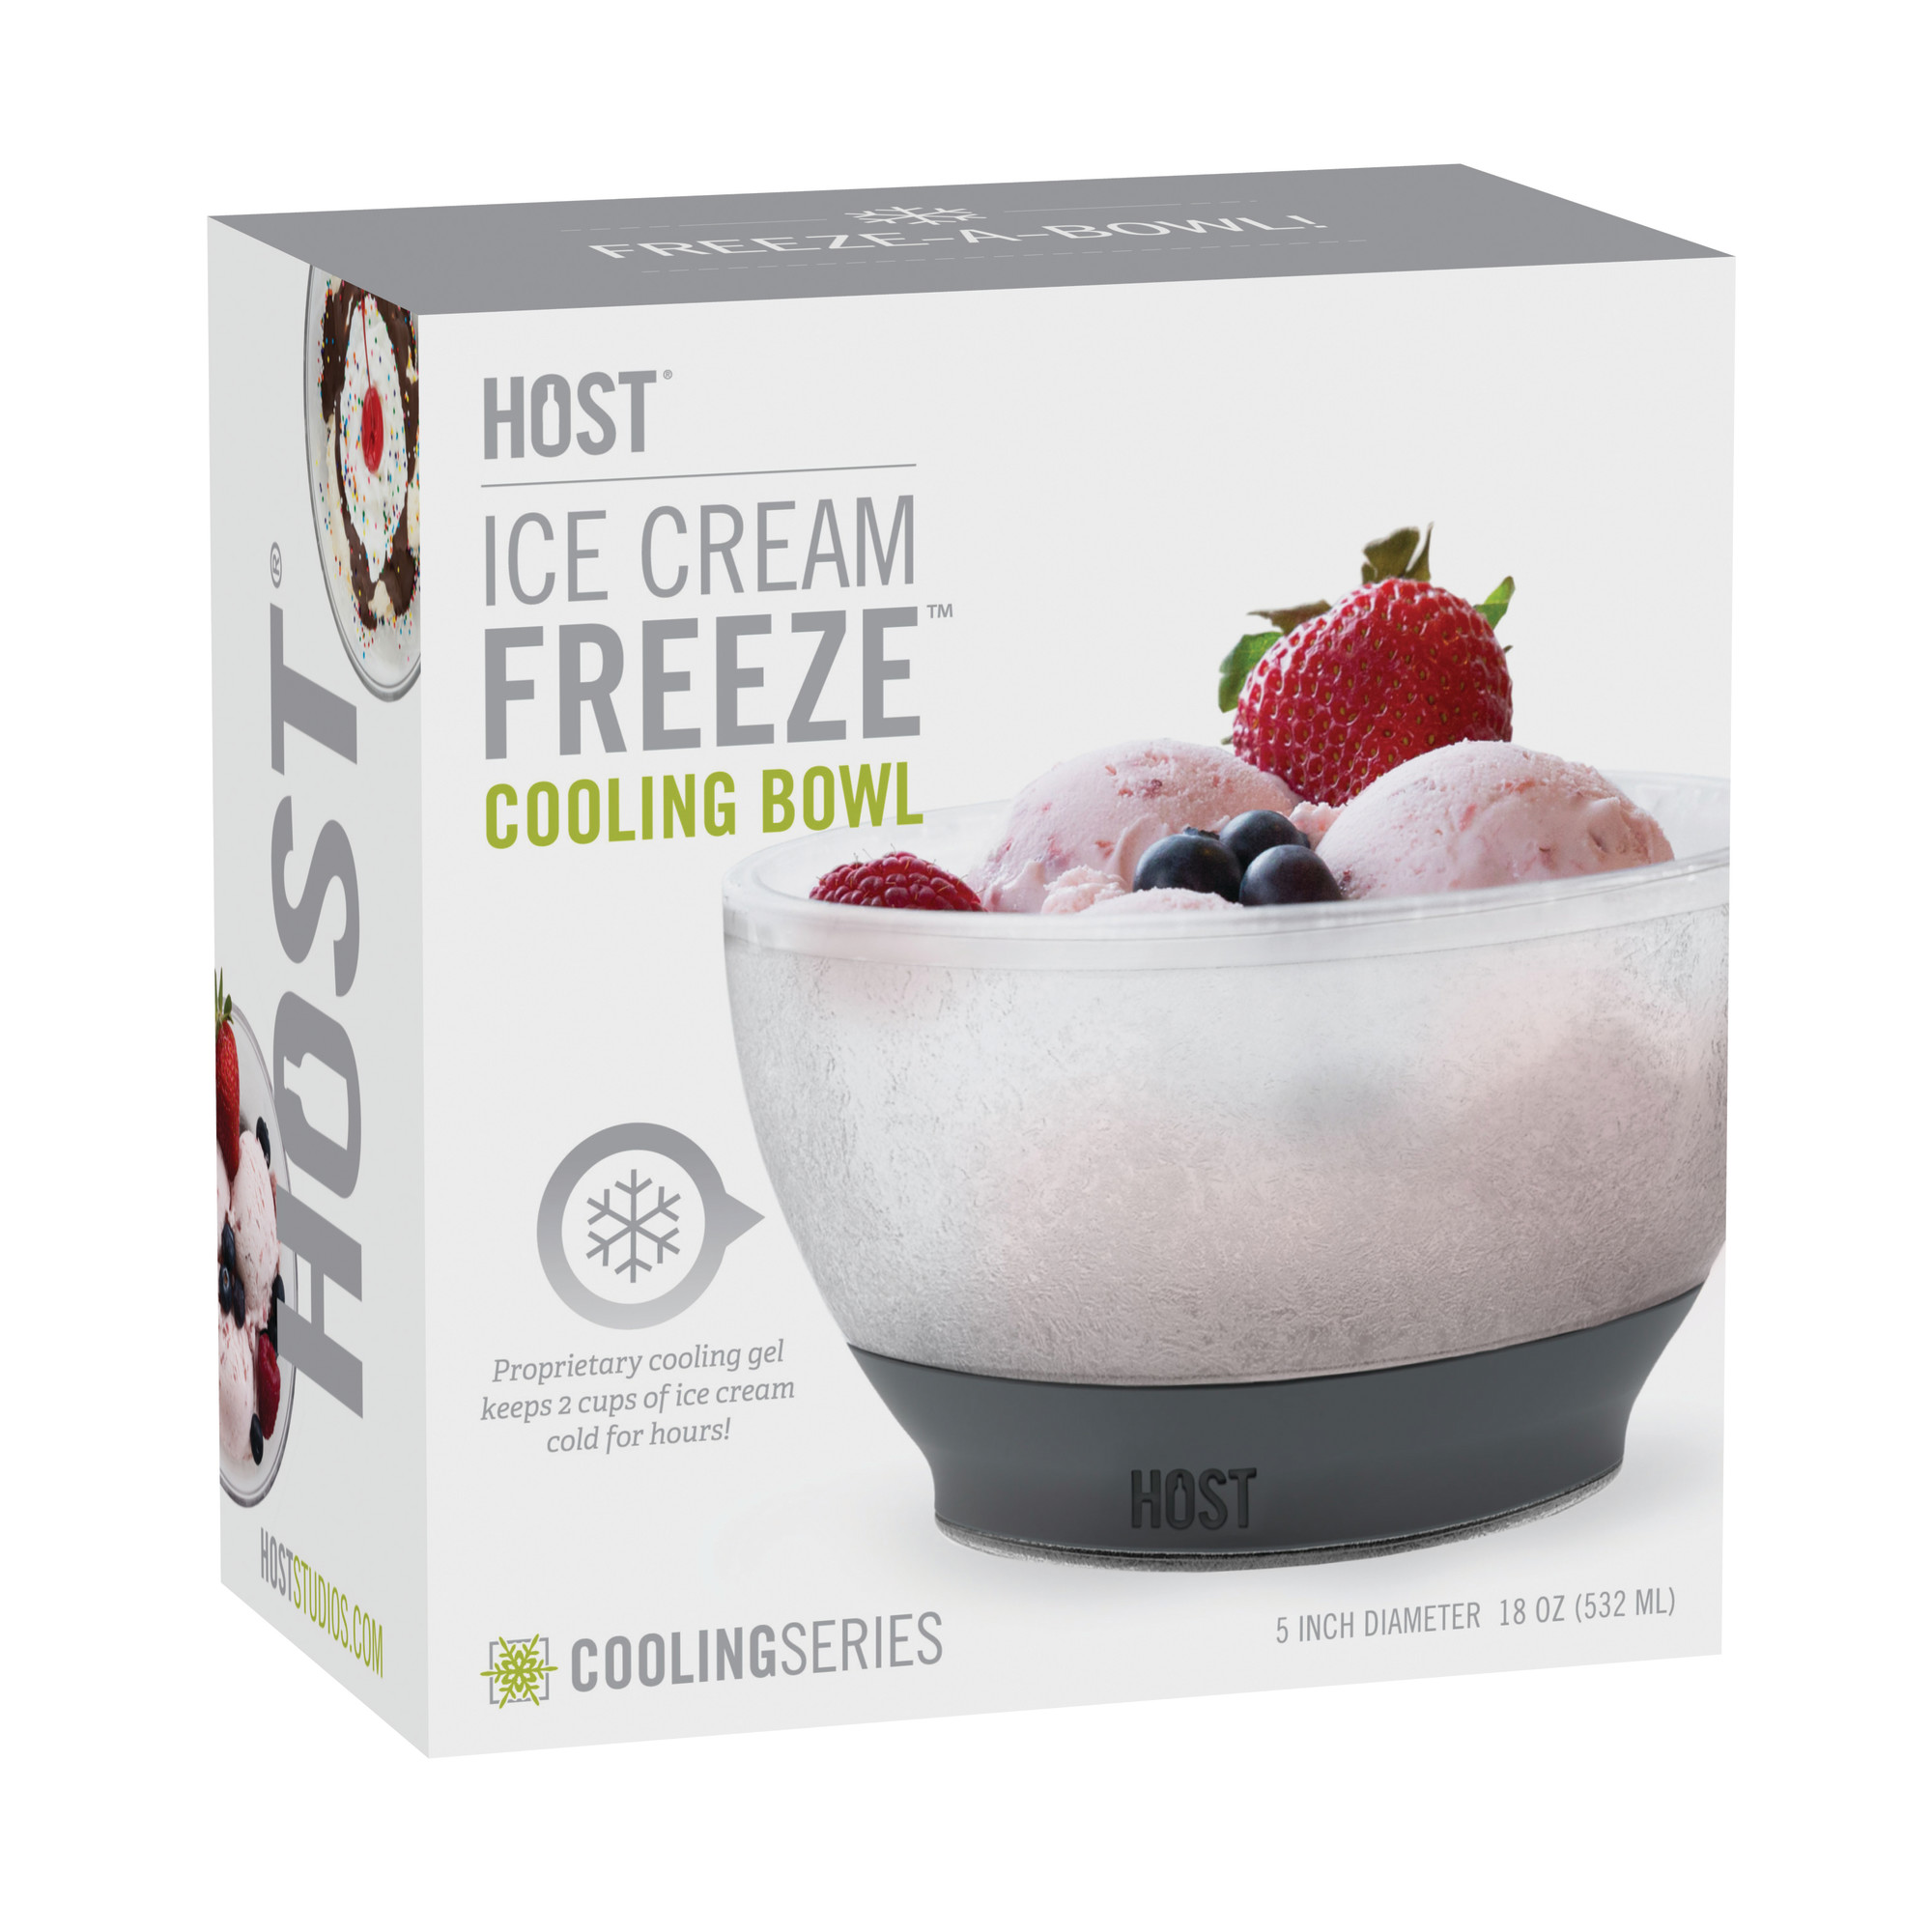 Host Ice Cream FREEZE Bowl Double Walled Insulated Dessert Bowl, Grey 